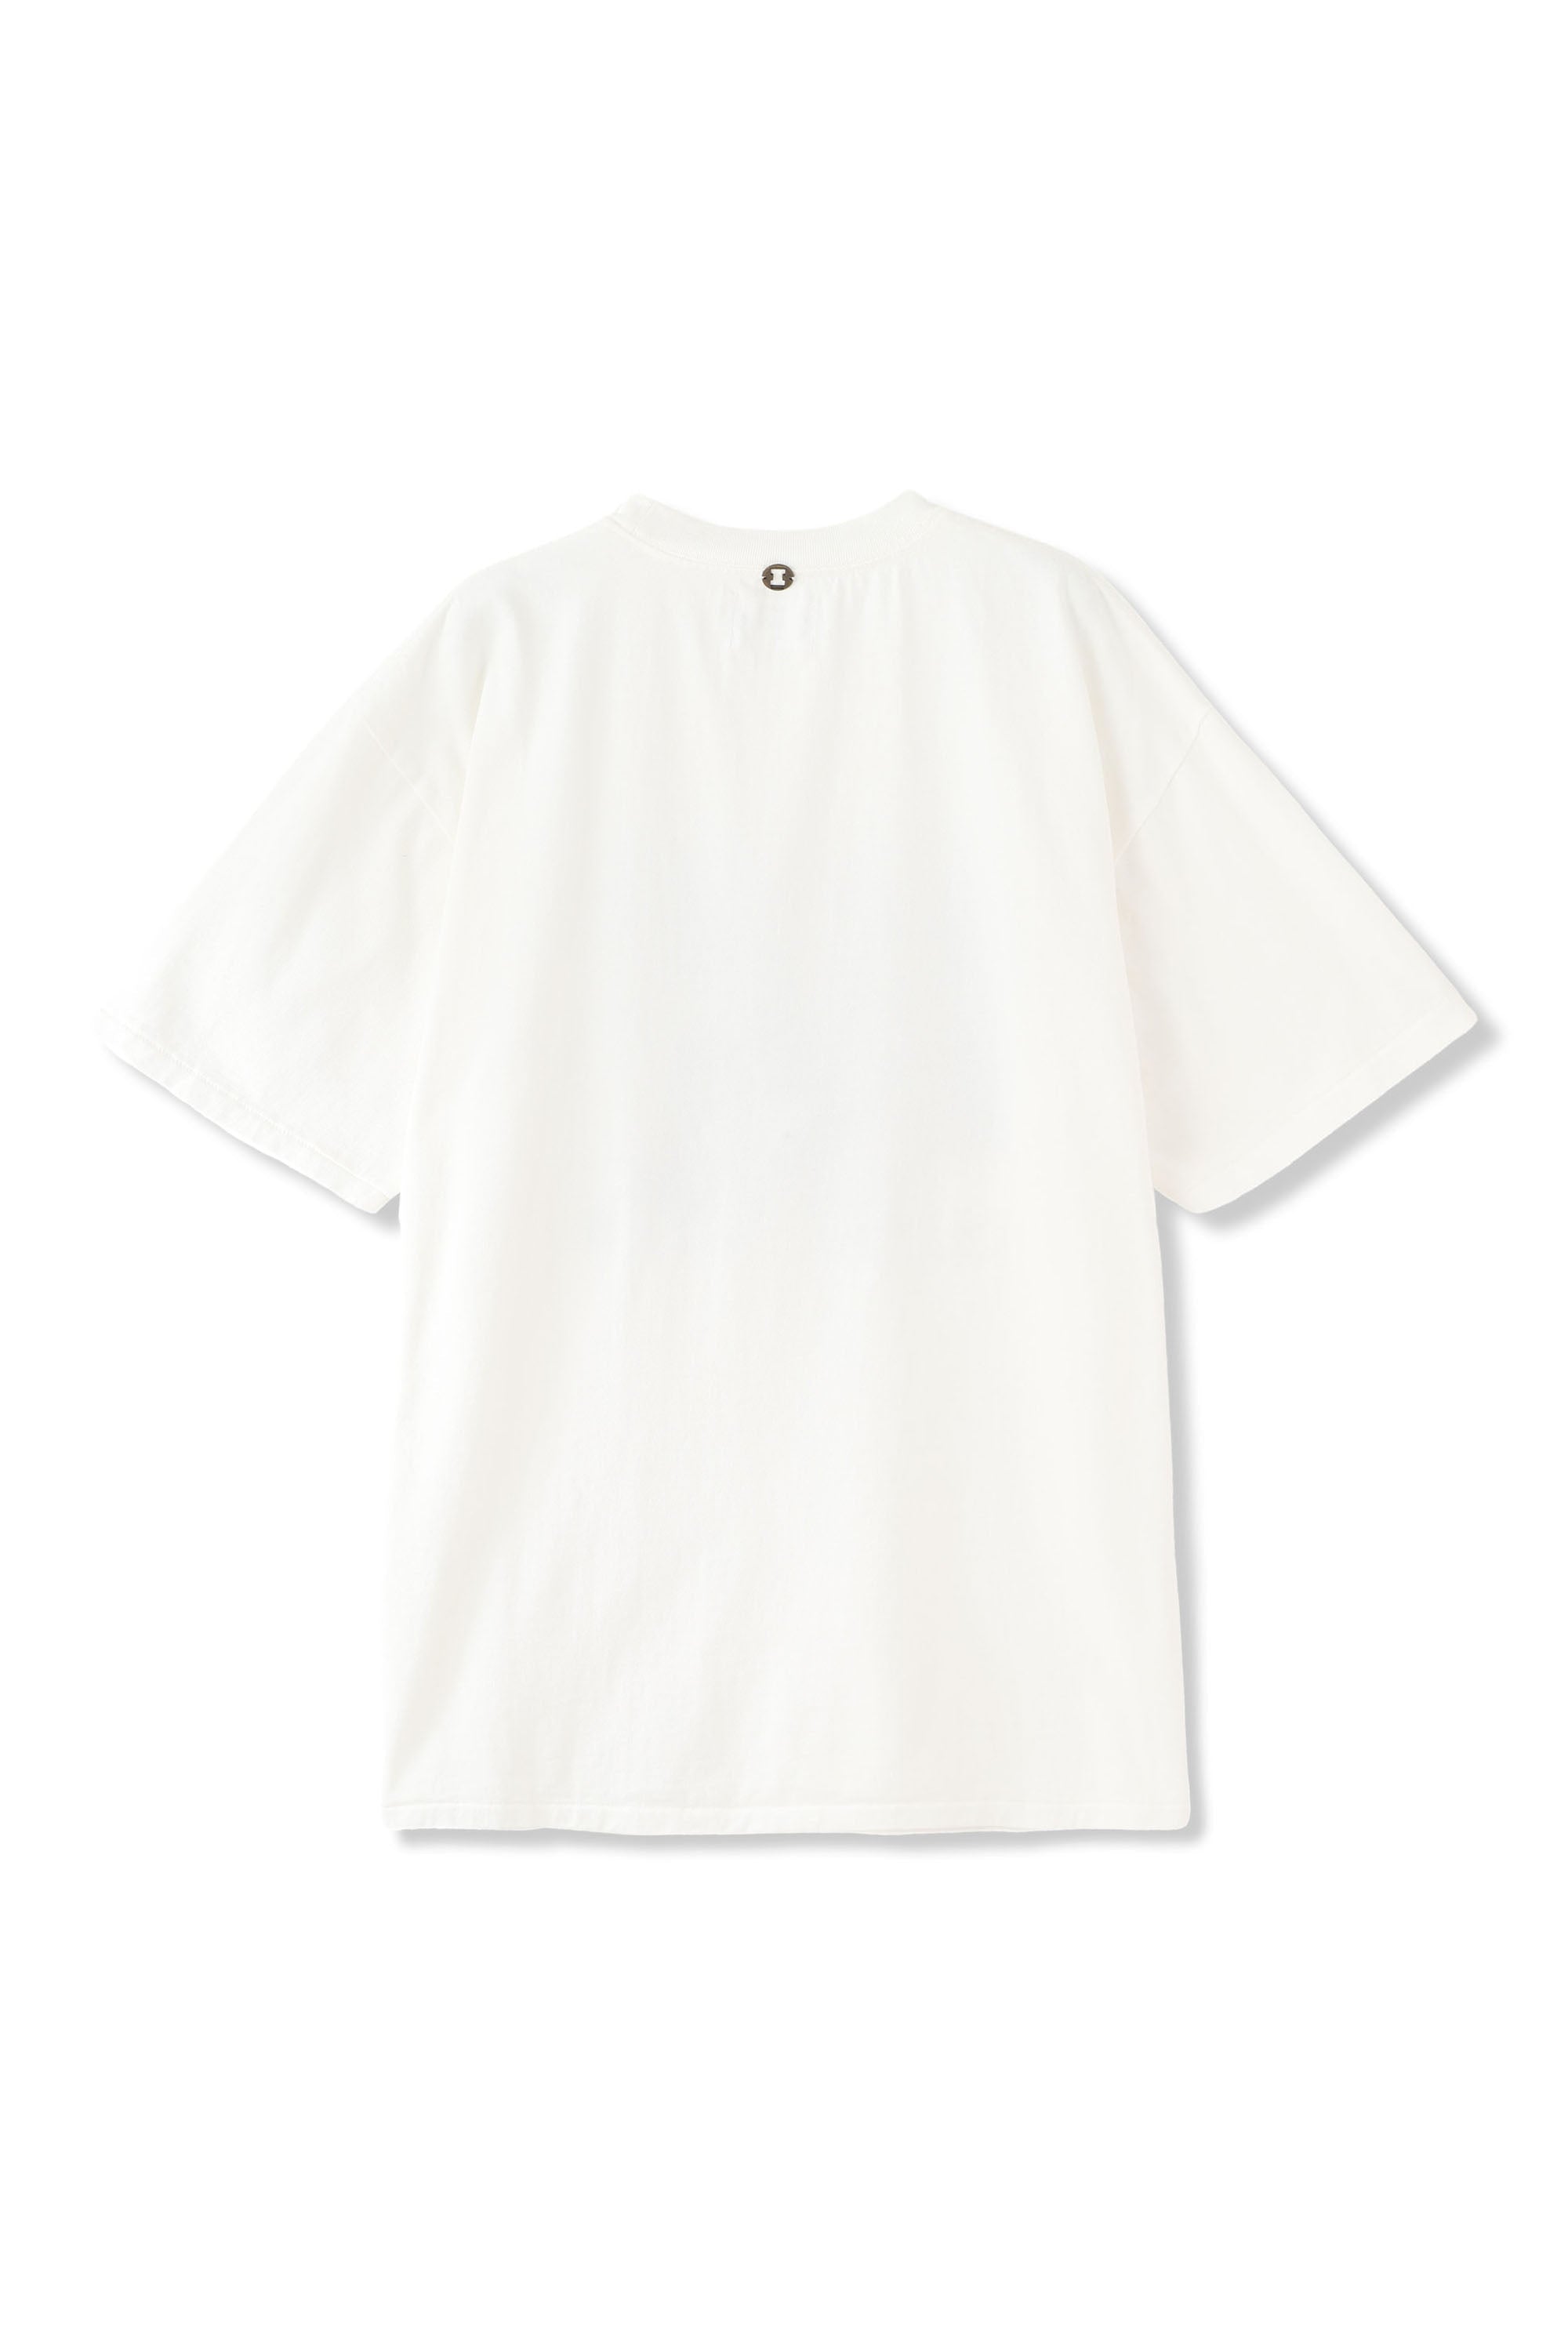 ×SONIC YOUTH DUNCETERIA TEE WHITE